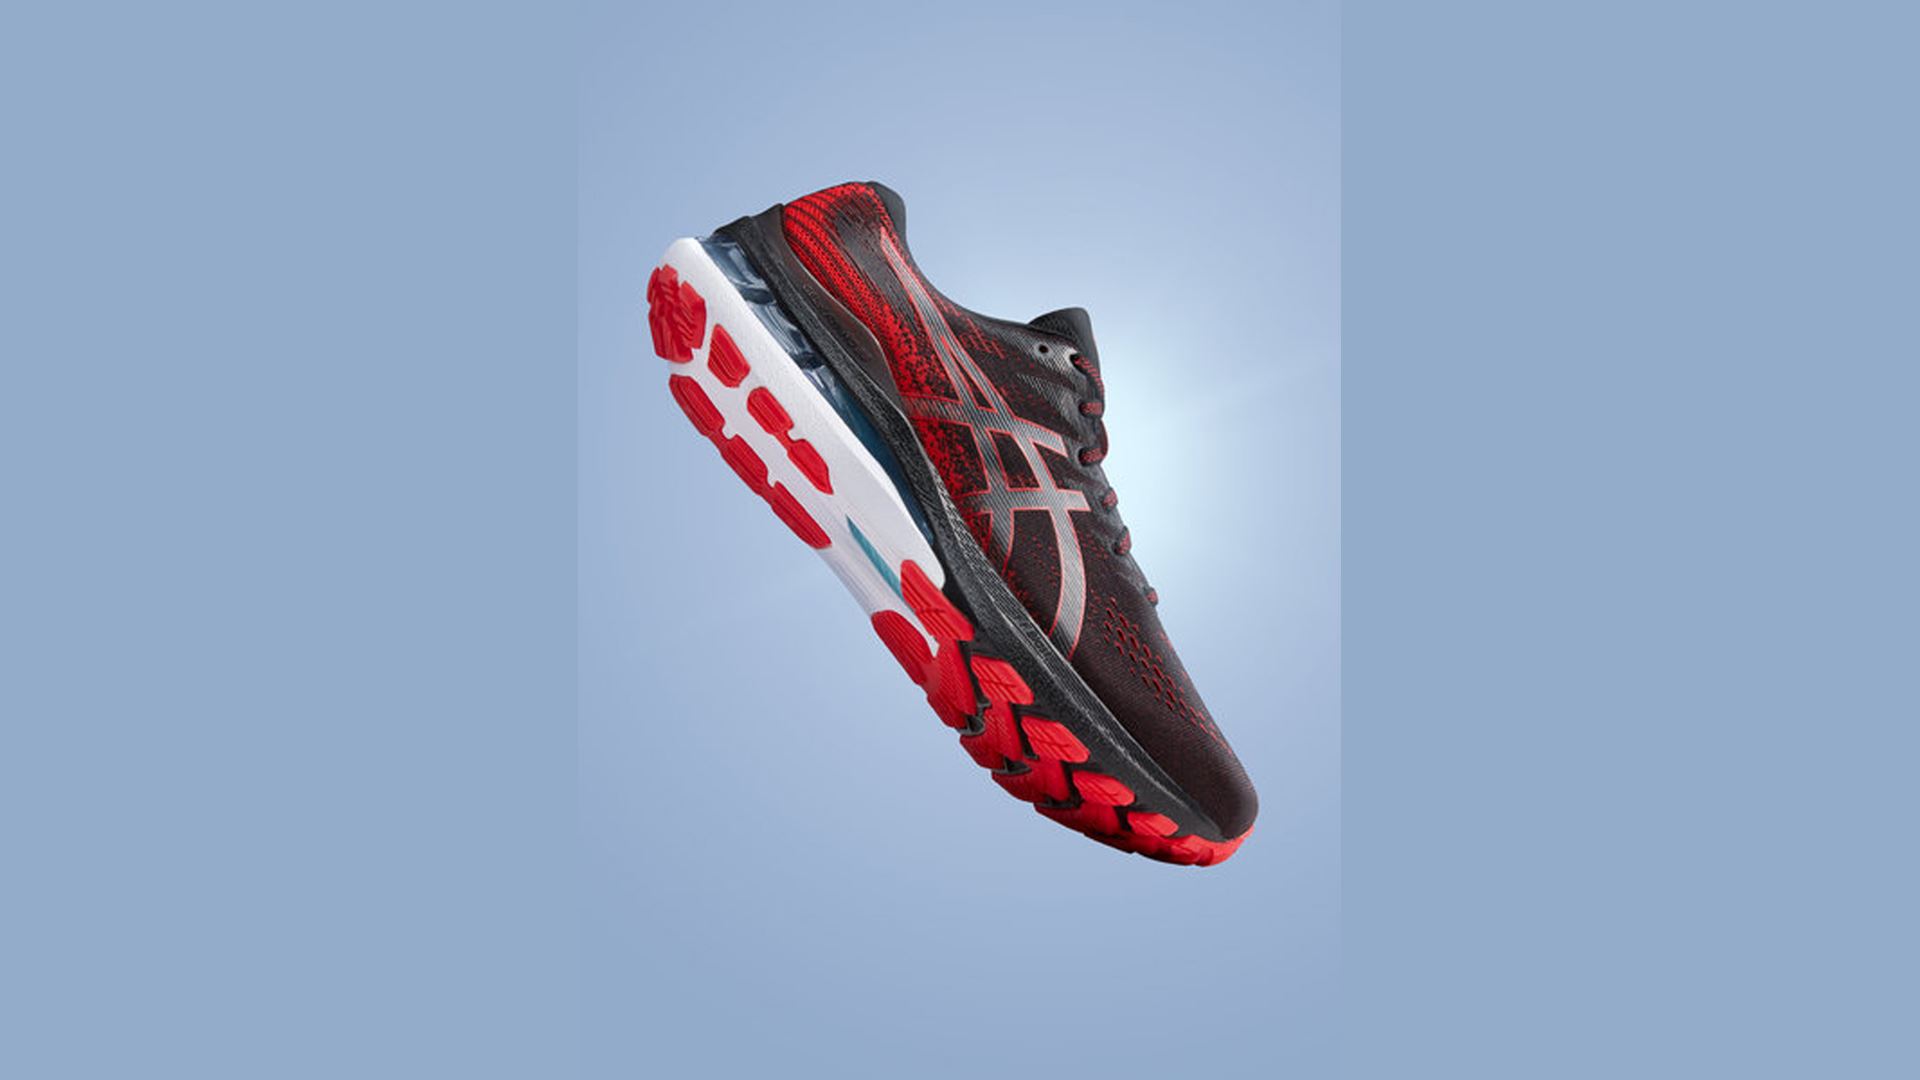 ASICS launches the GEL-KAYANO™ 28, delivering its trademark stability with an even smoother ride